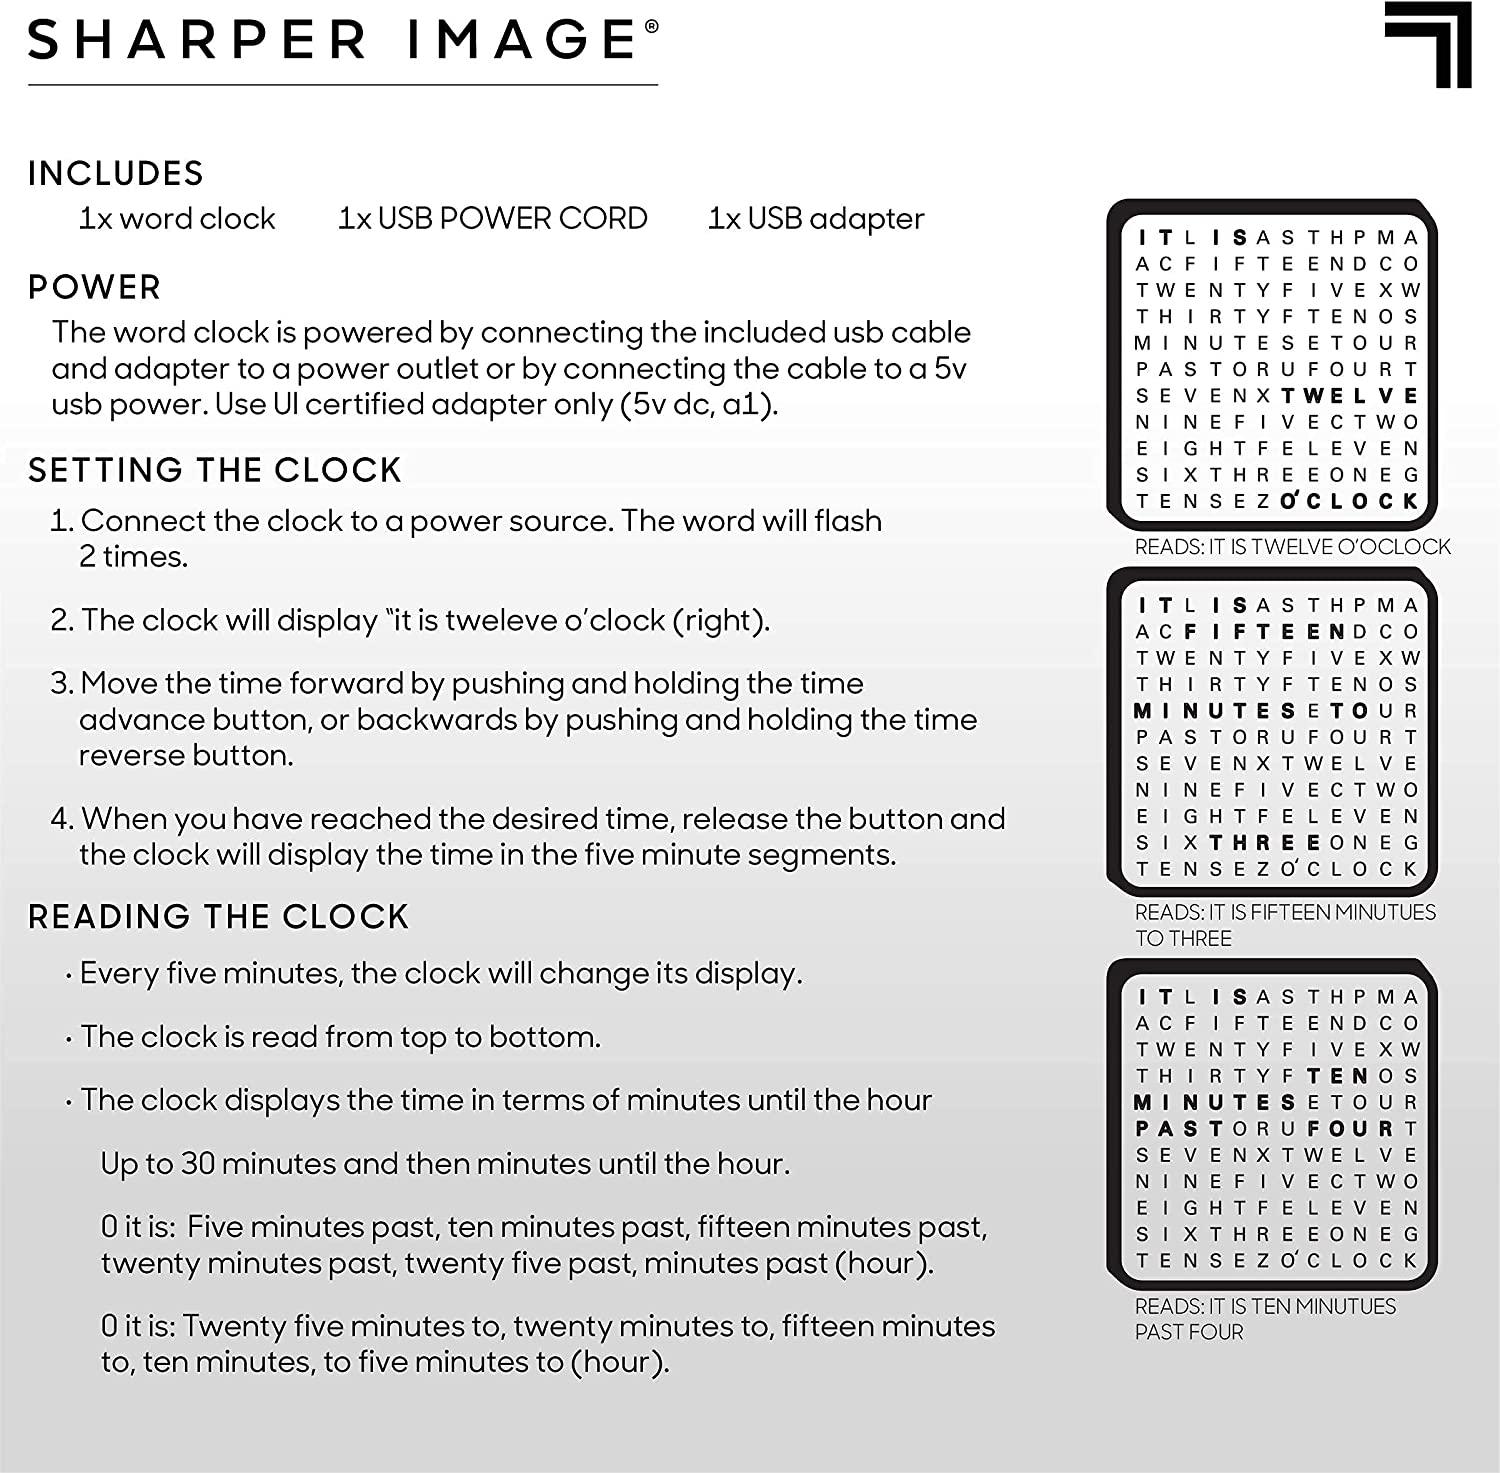 SHARPER IMAGE® LED Light-Up Word Clock, 7.75" Modern Design, Electronic Accent Wall or Desk Clock, USB Cord & Power Adapter, Unique Contemporary Home & Office Decor, Easy Setup, Housewarming Gift